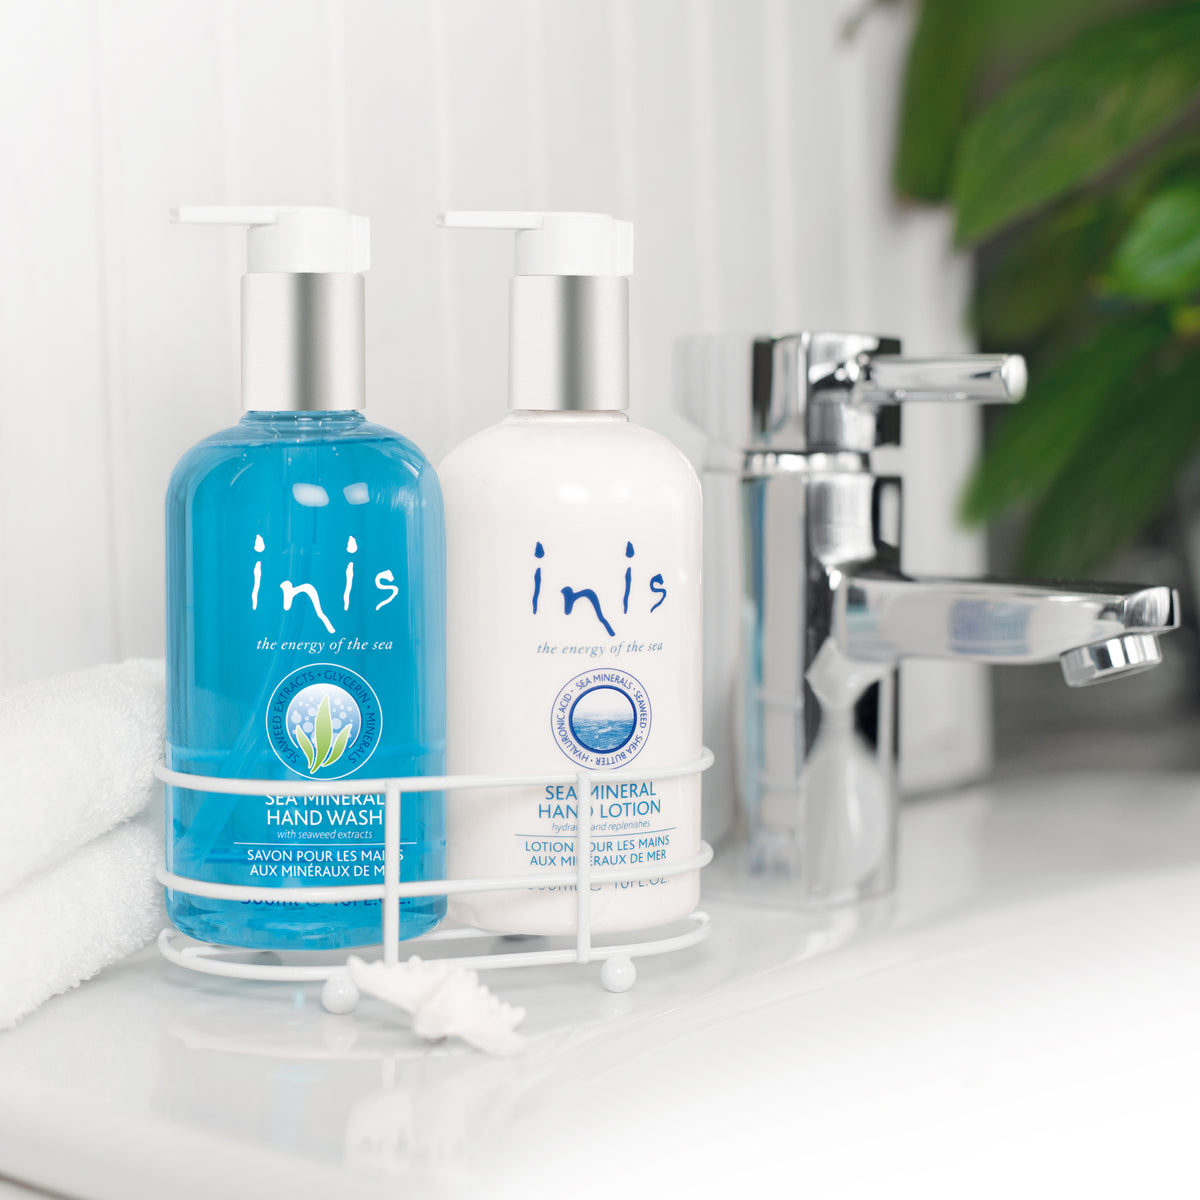 Inis - Hand Care Caddy